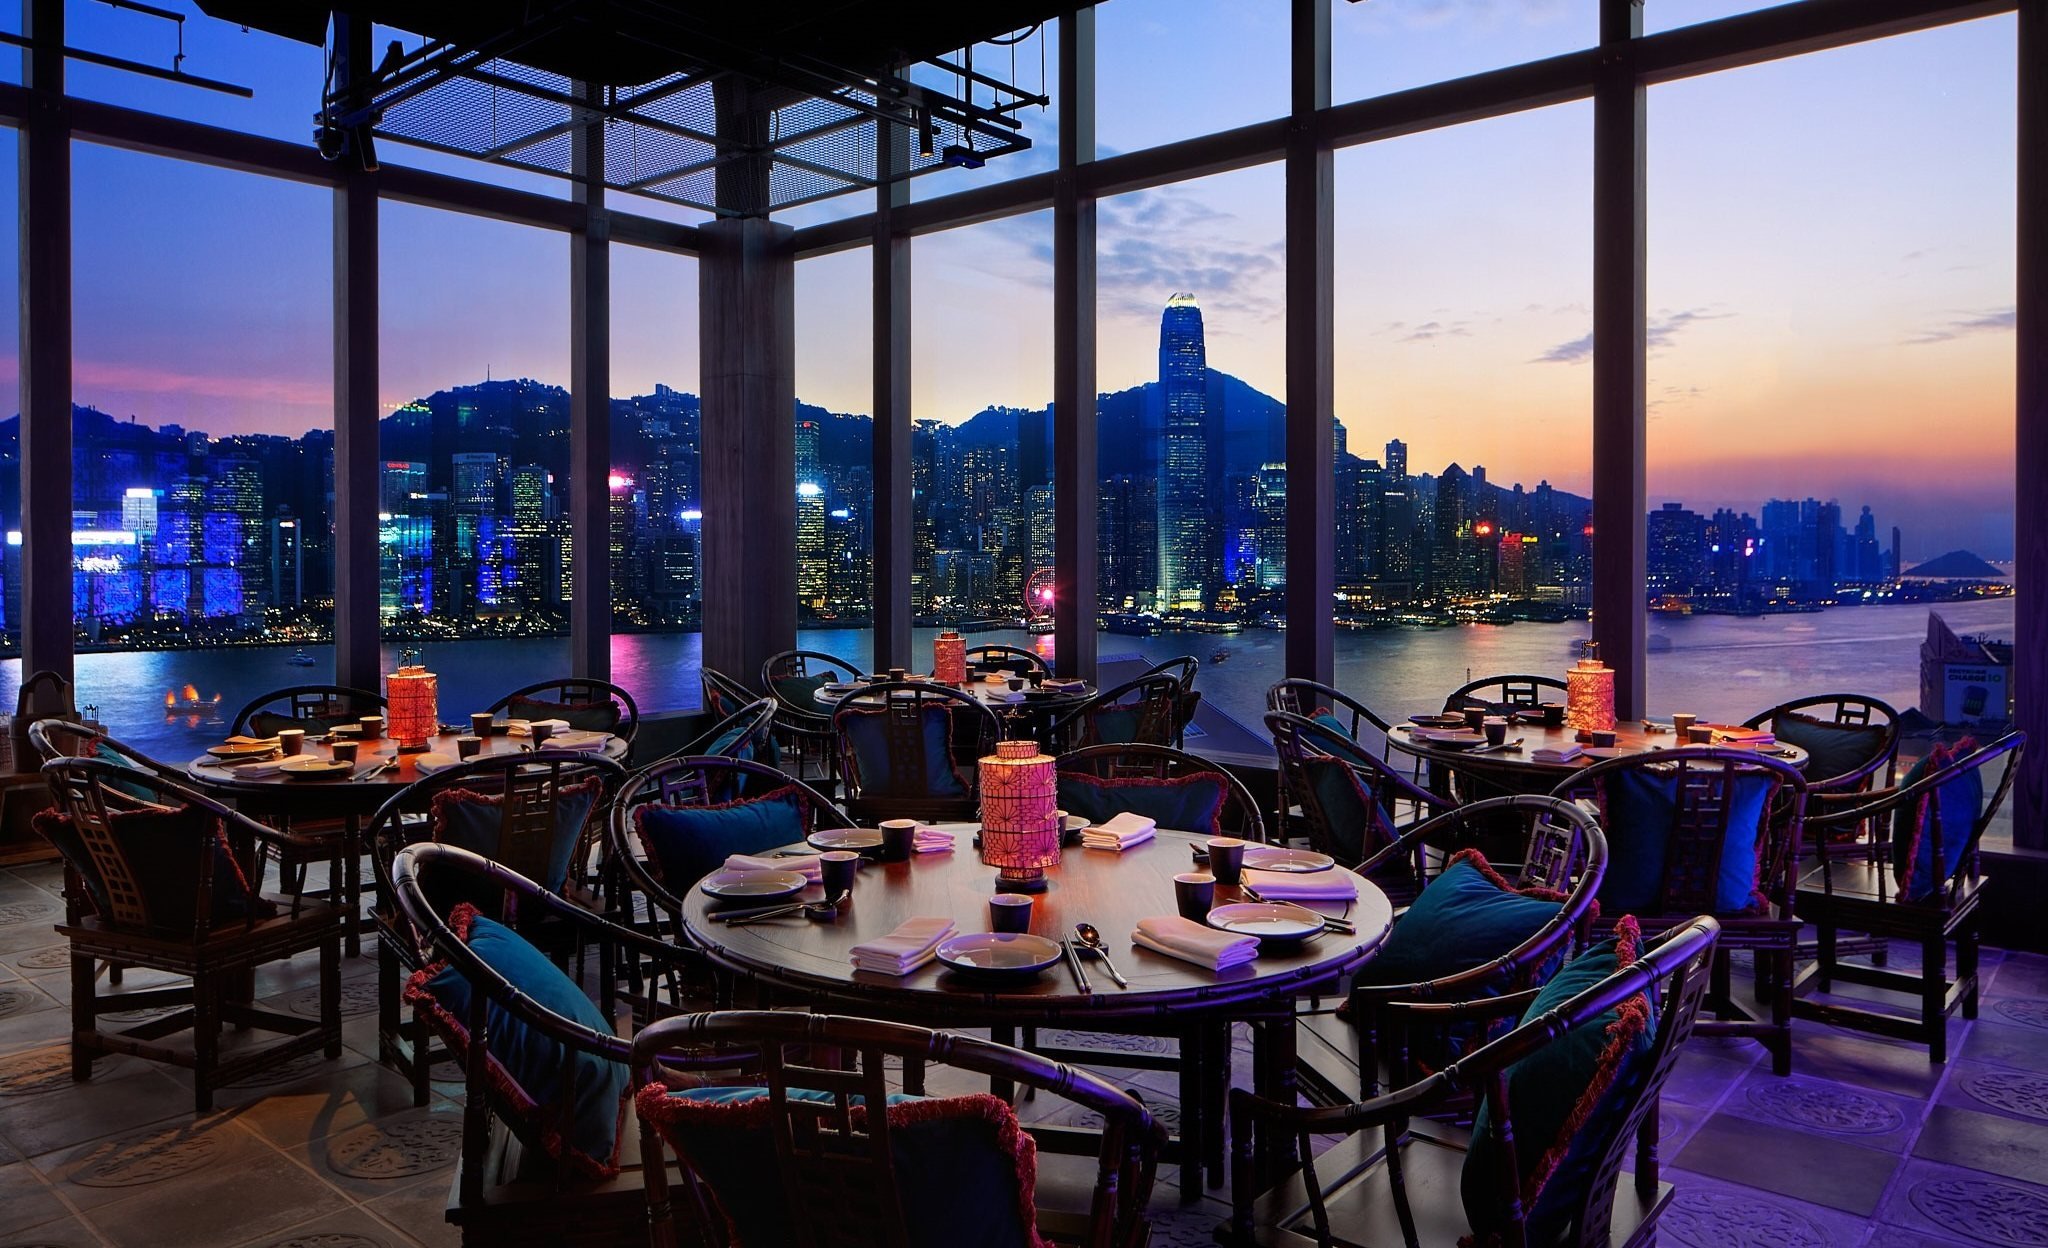 Hutong has been listed in the Chinese category in the South China Morning Post’s 100 Top Tables 2022, which features 100 of the best restaurants in Hong Kong and Macau.